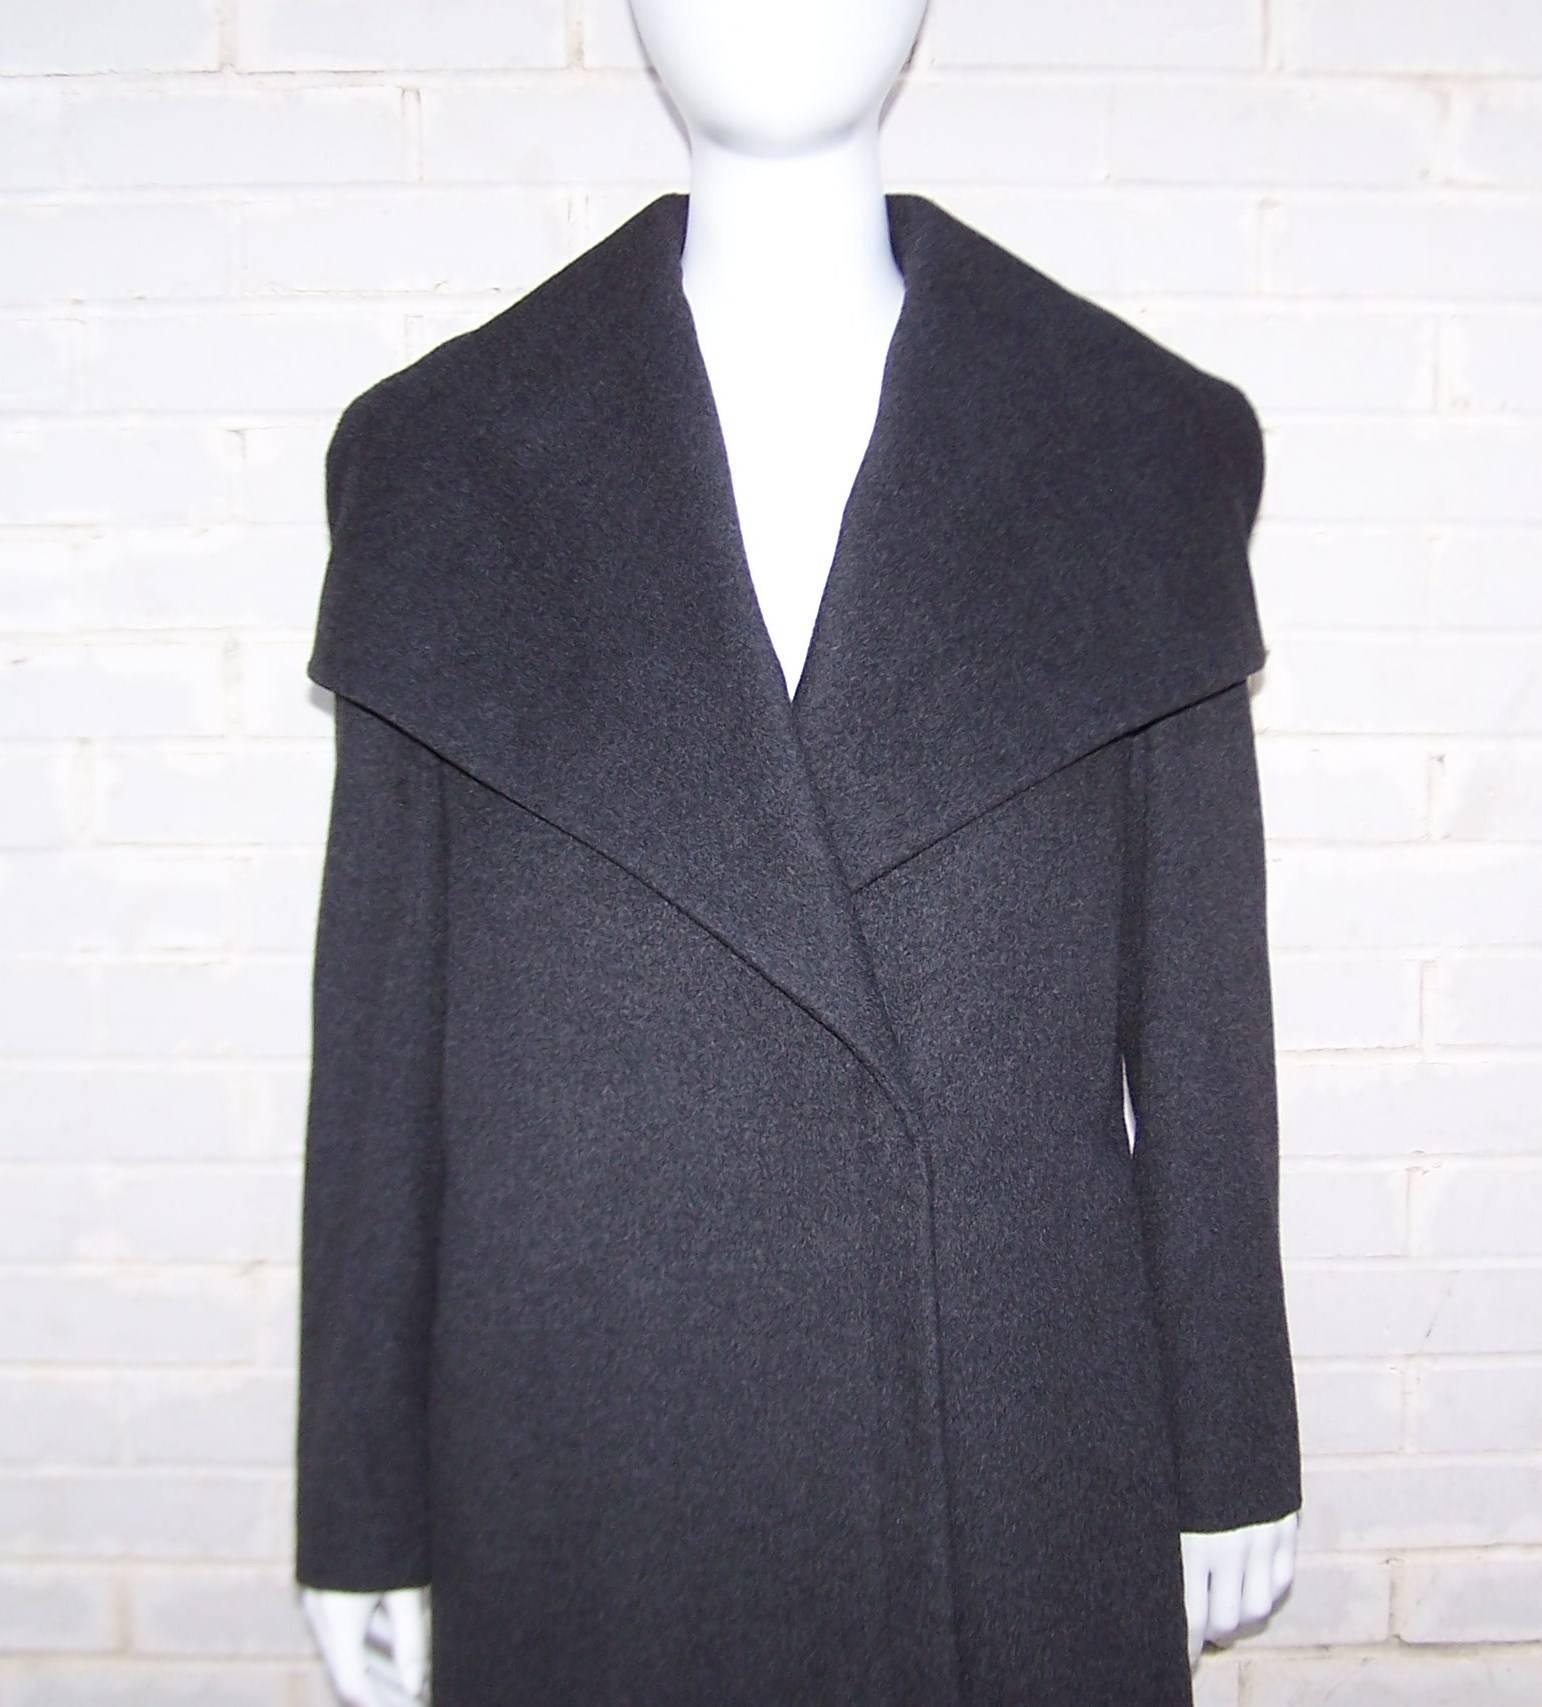 Women's Austere 1990's Tse Charcoal Gray Cashmere Coat With Shawl Style Capelet